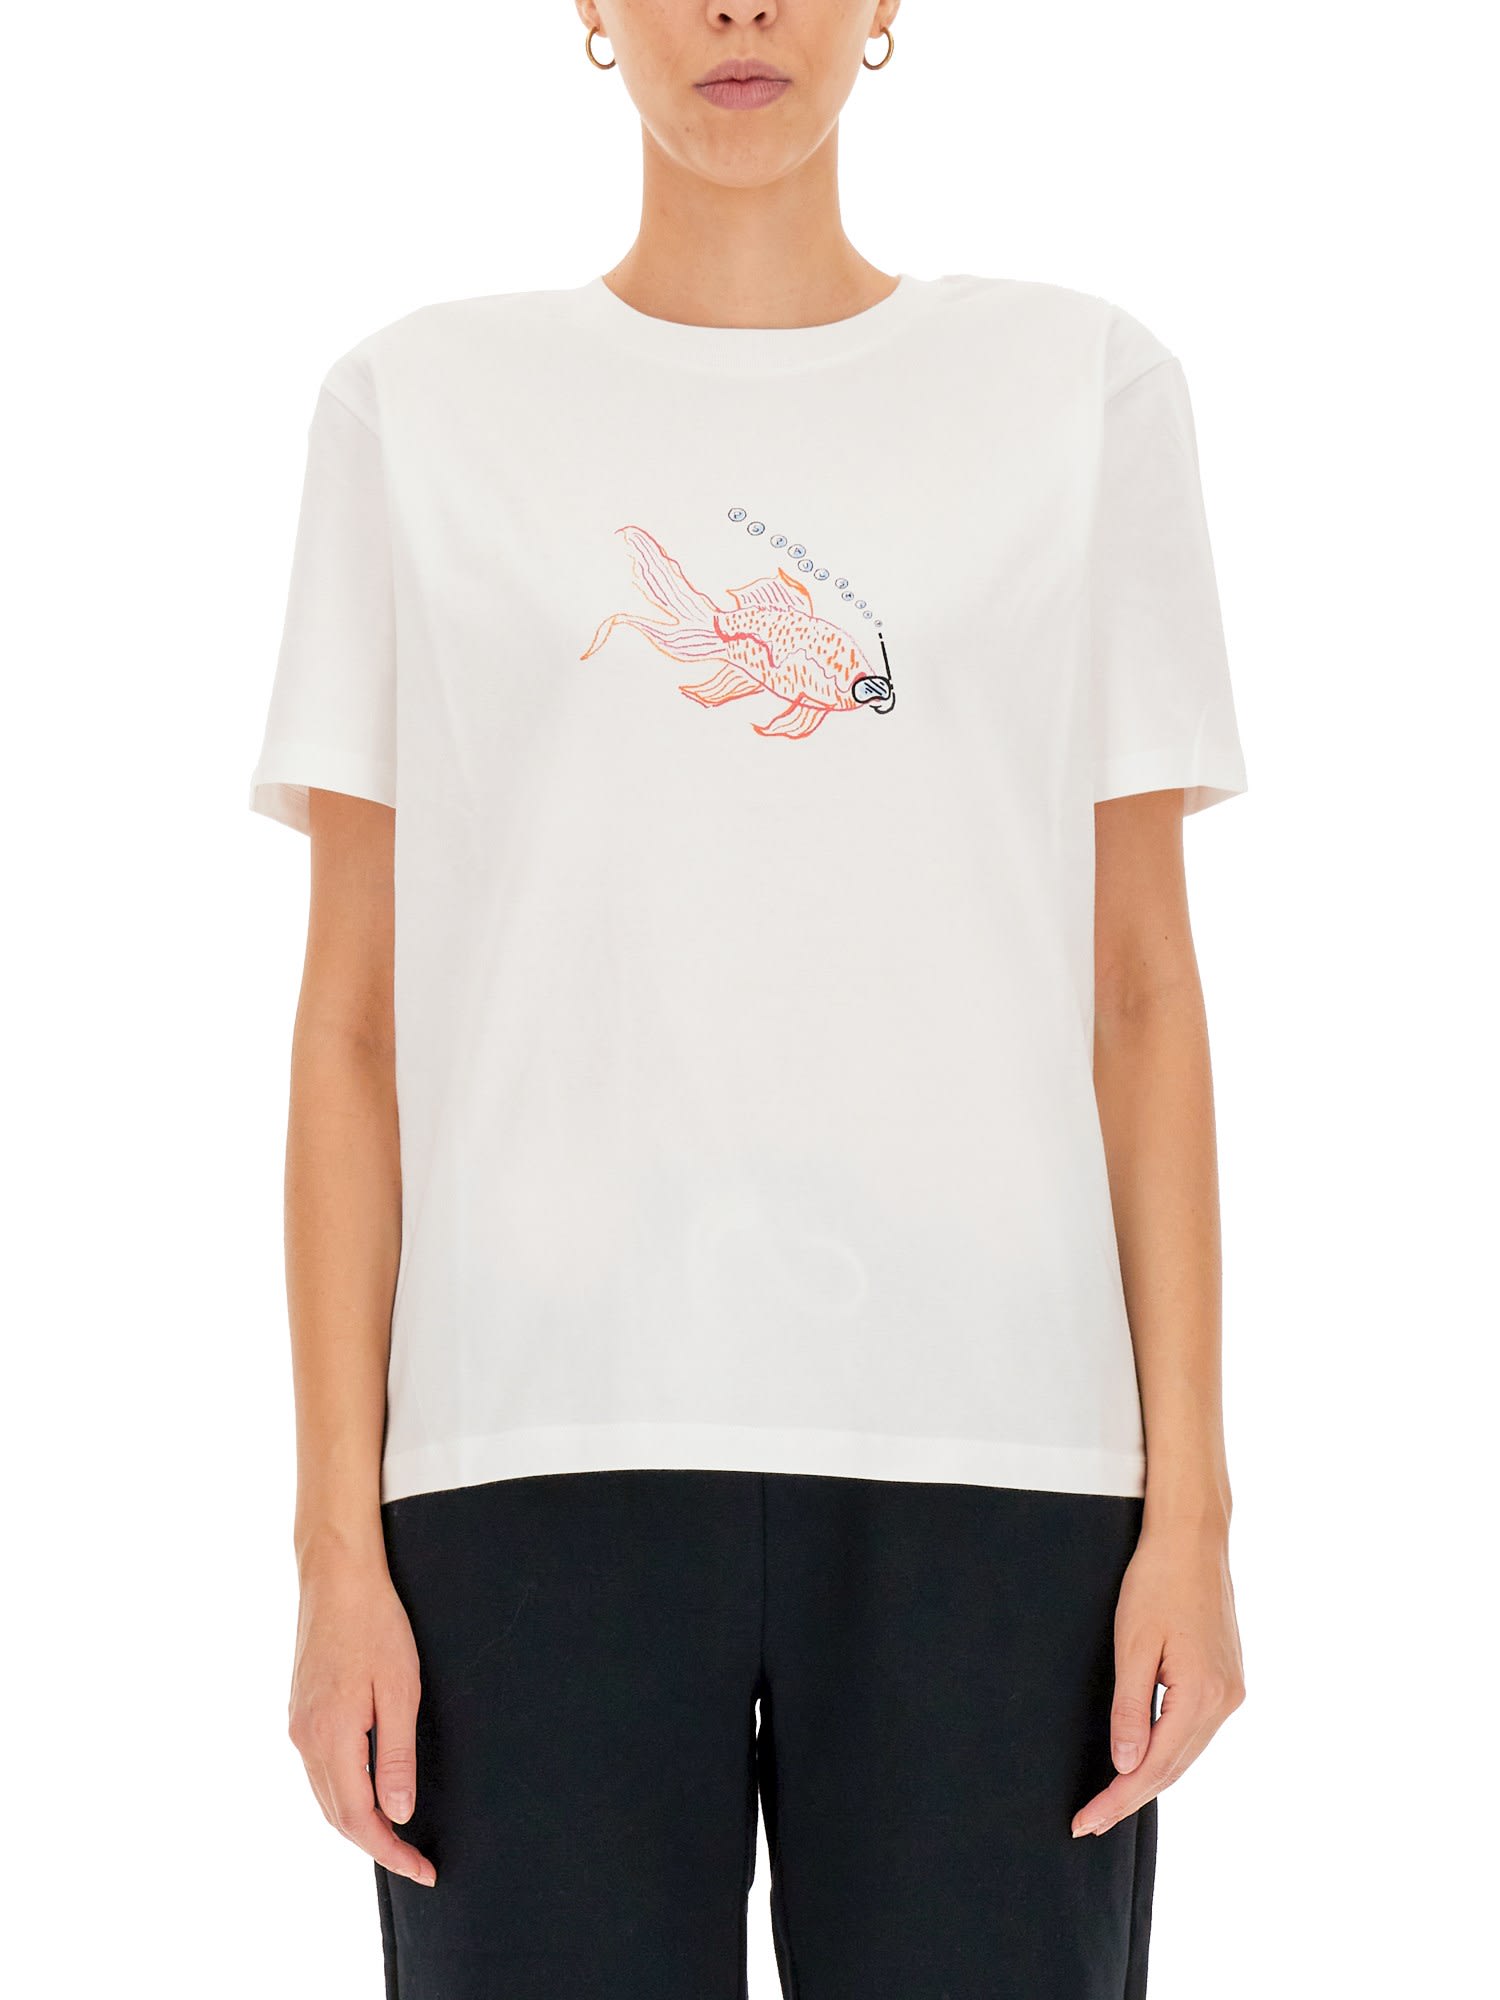 PS by Paul Smith Goldfish T-shirt